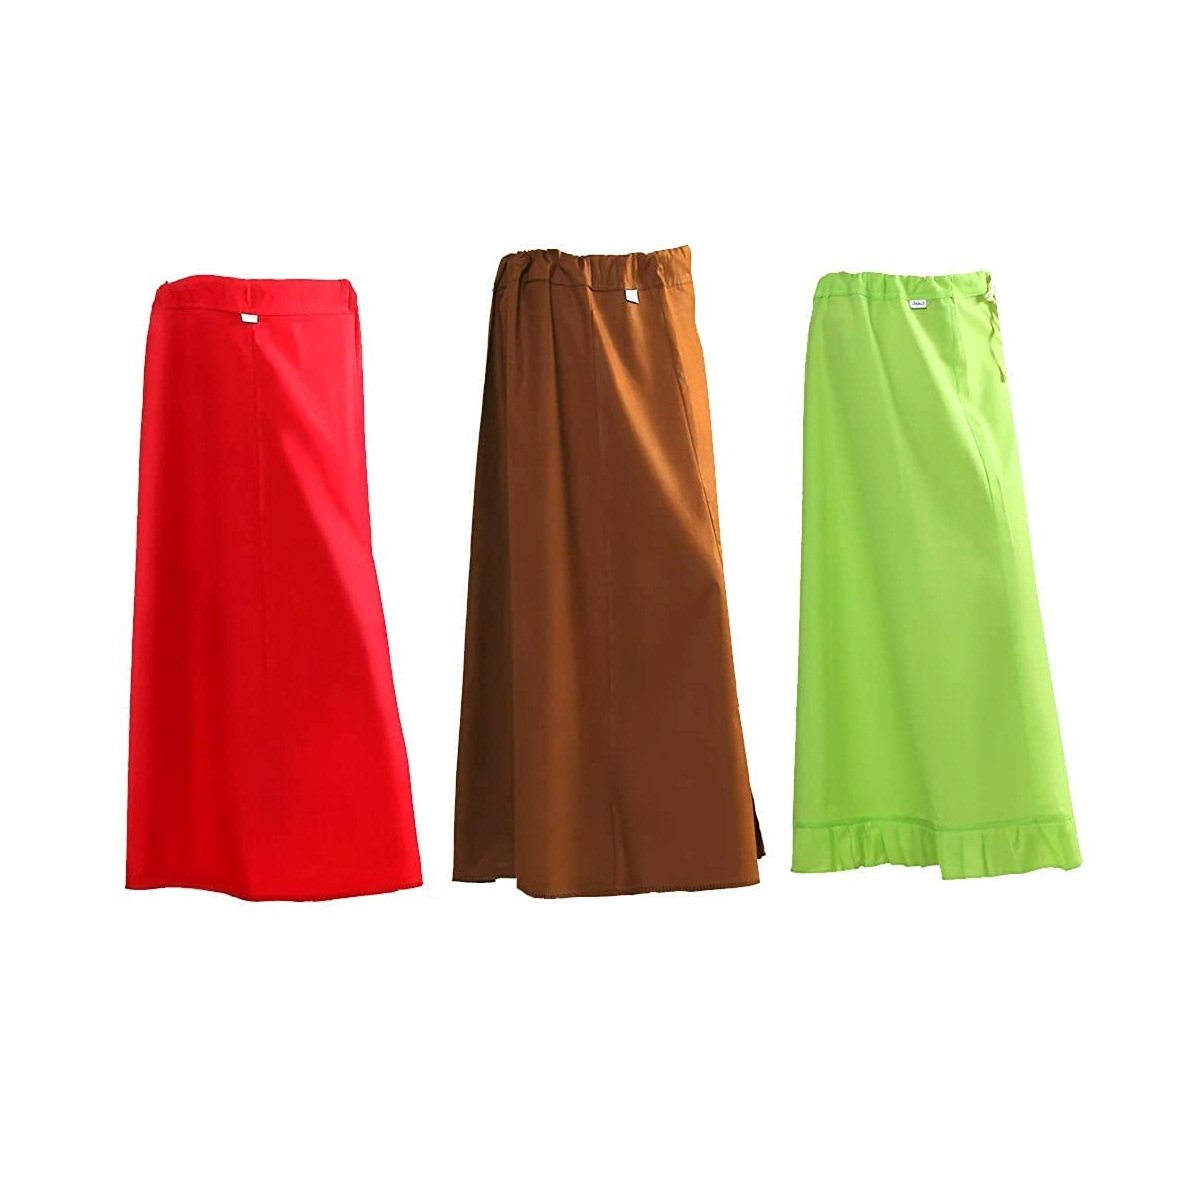 Siddhi Cotton Saree Petticoat Stitched 9 Part Pack of 3 – Cotton